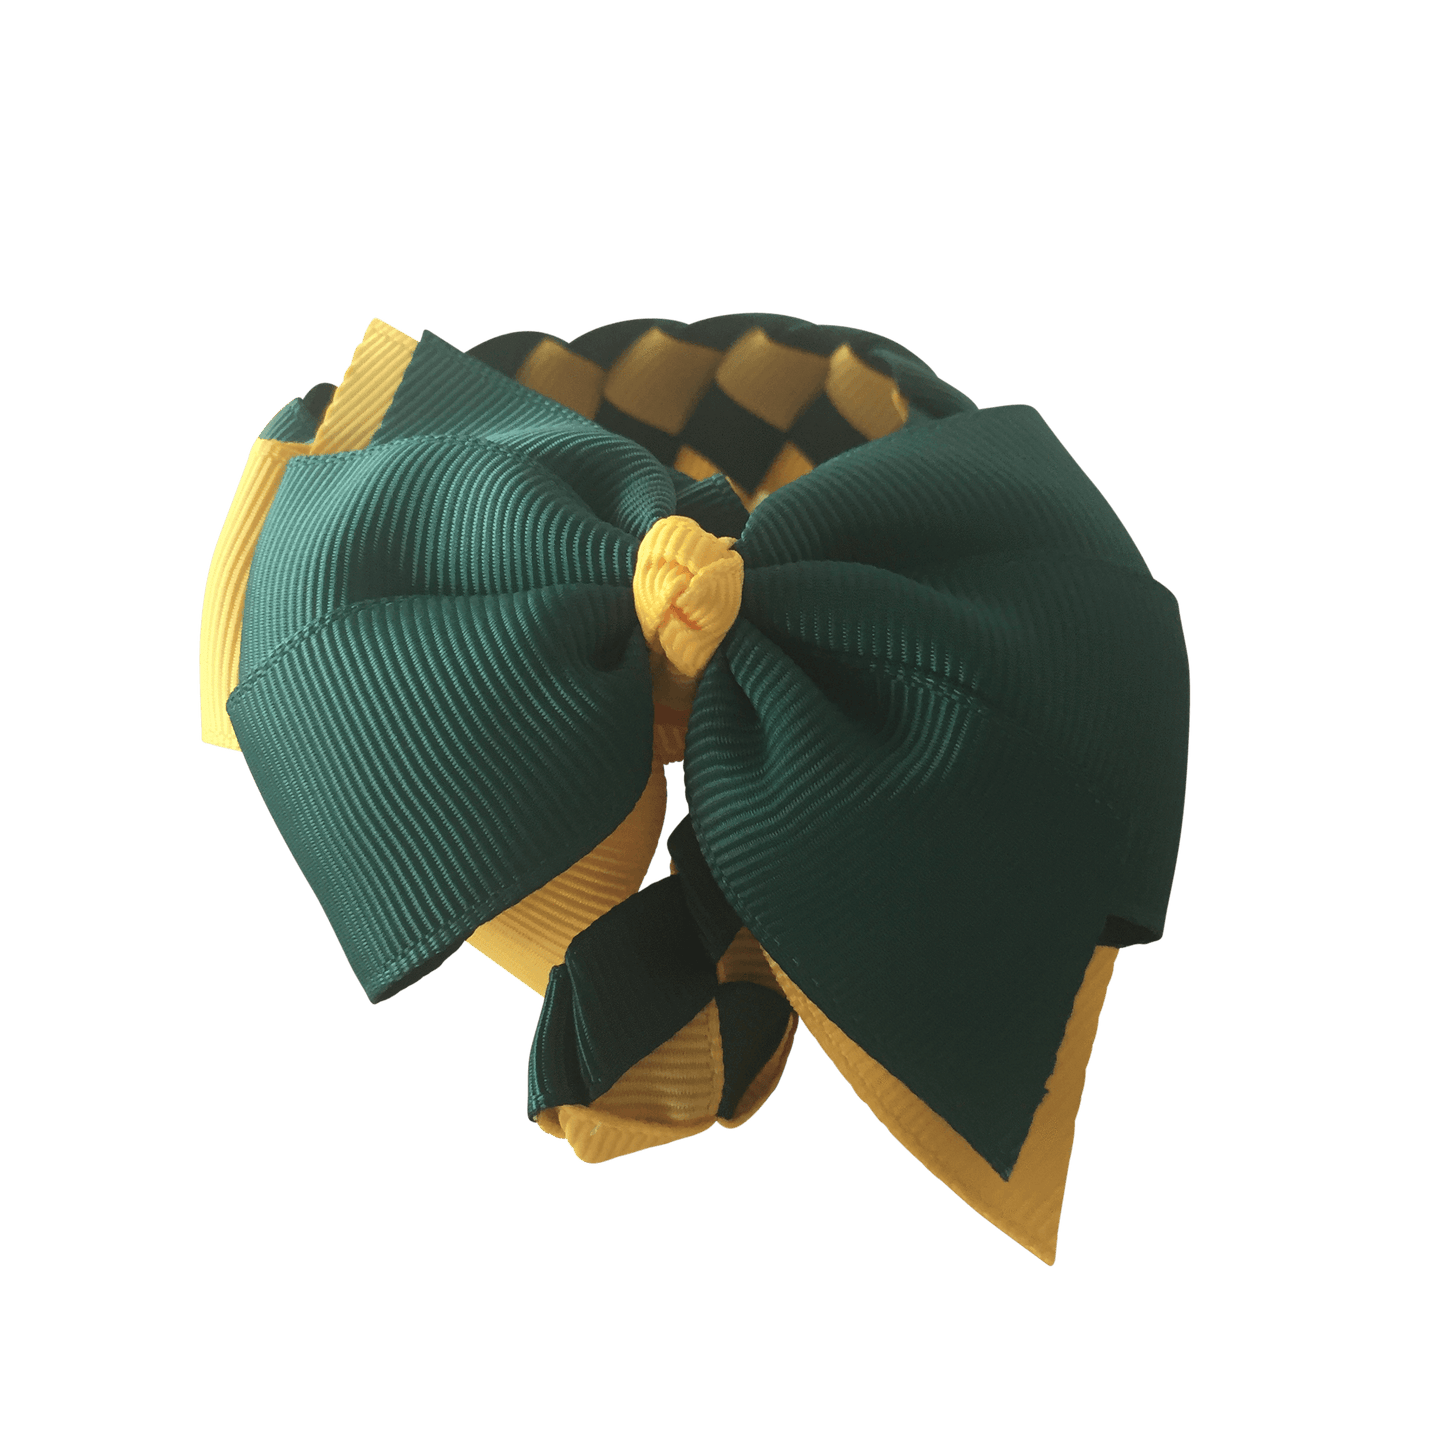 Bottle Green & Yellow Hair Accessories - Ponytails and Fairytales